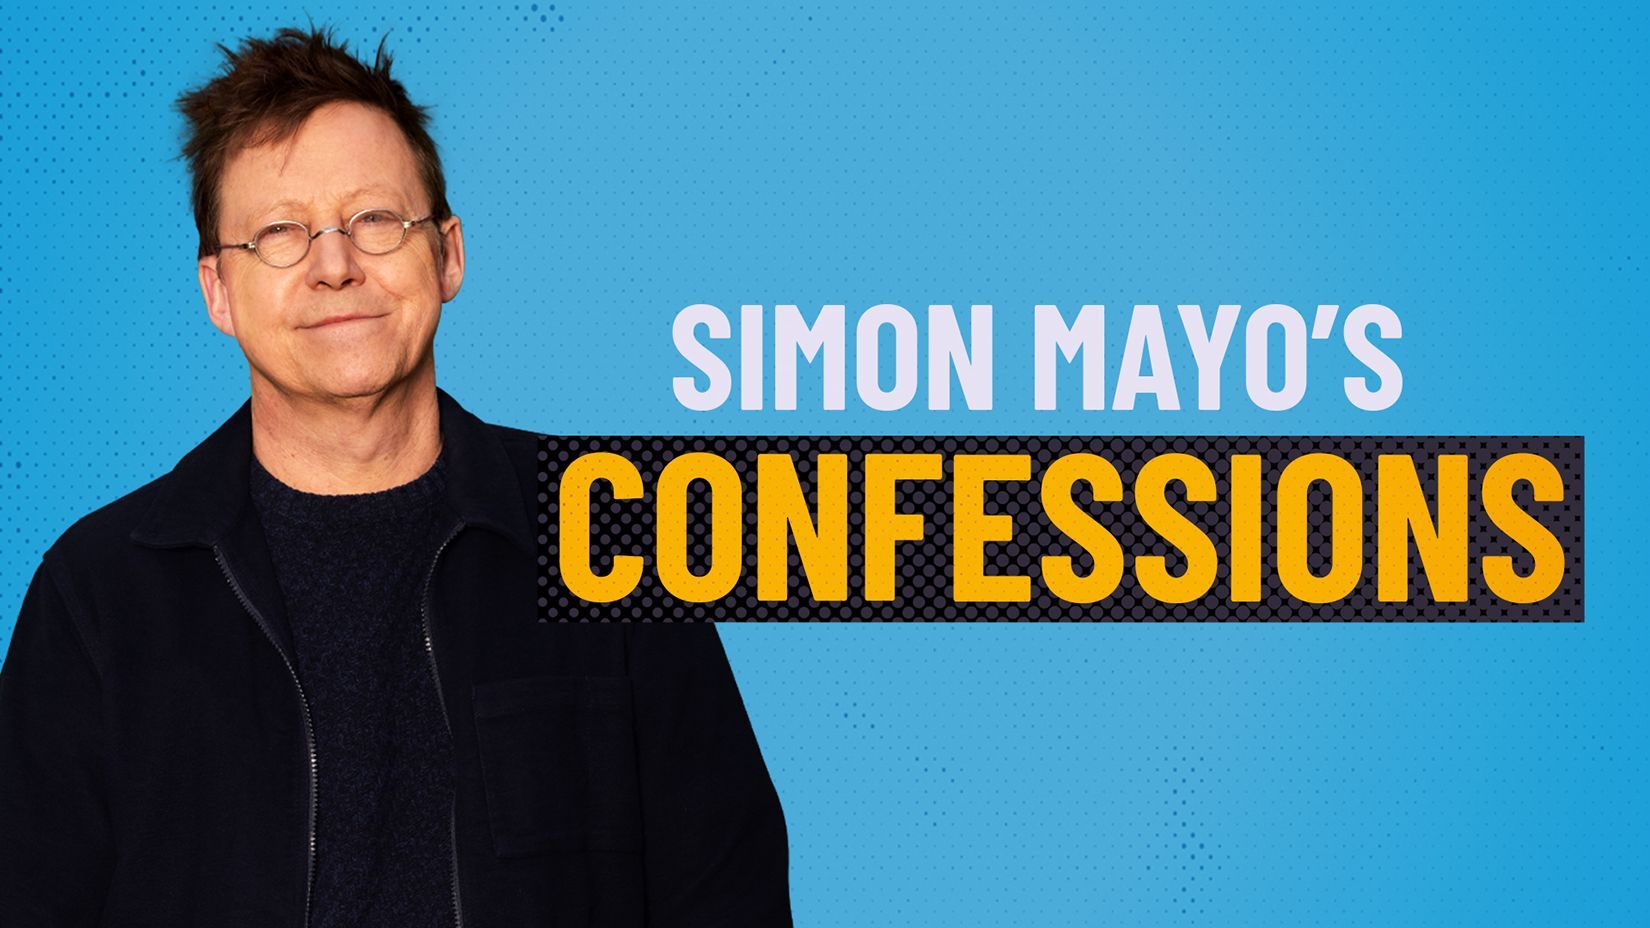 Simon Mayo's Confessions: How to submit your story